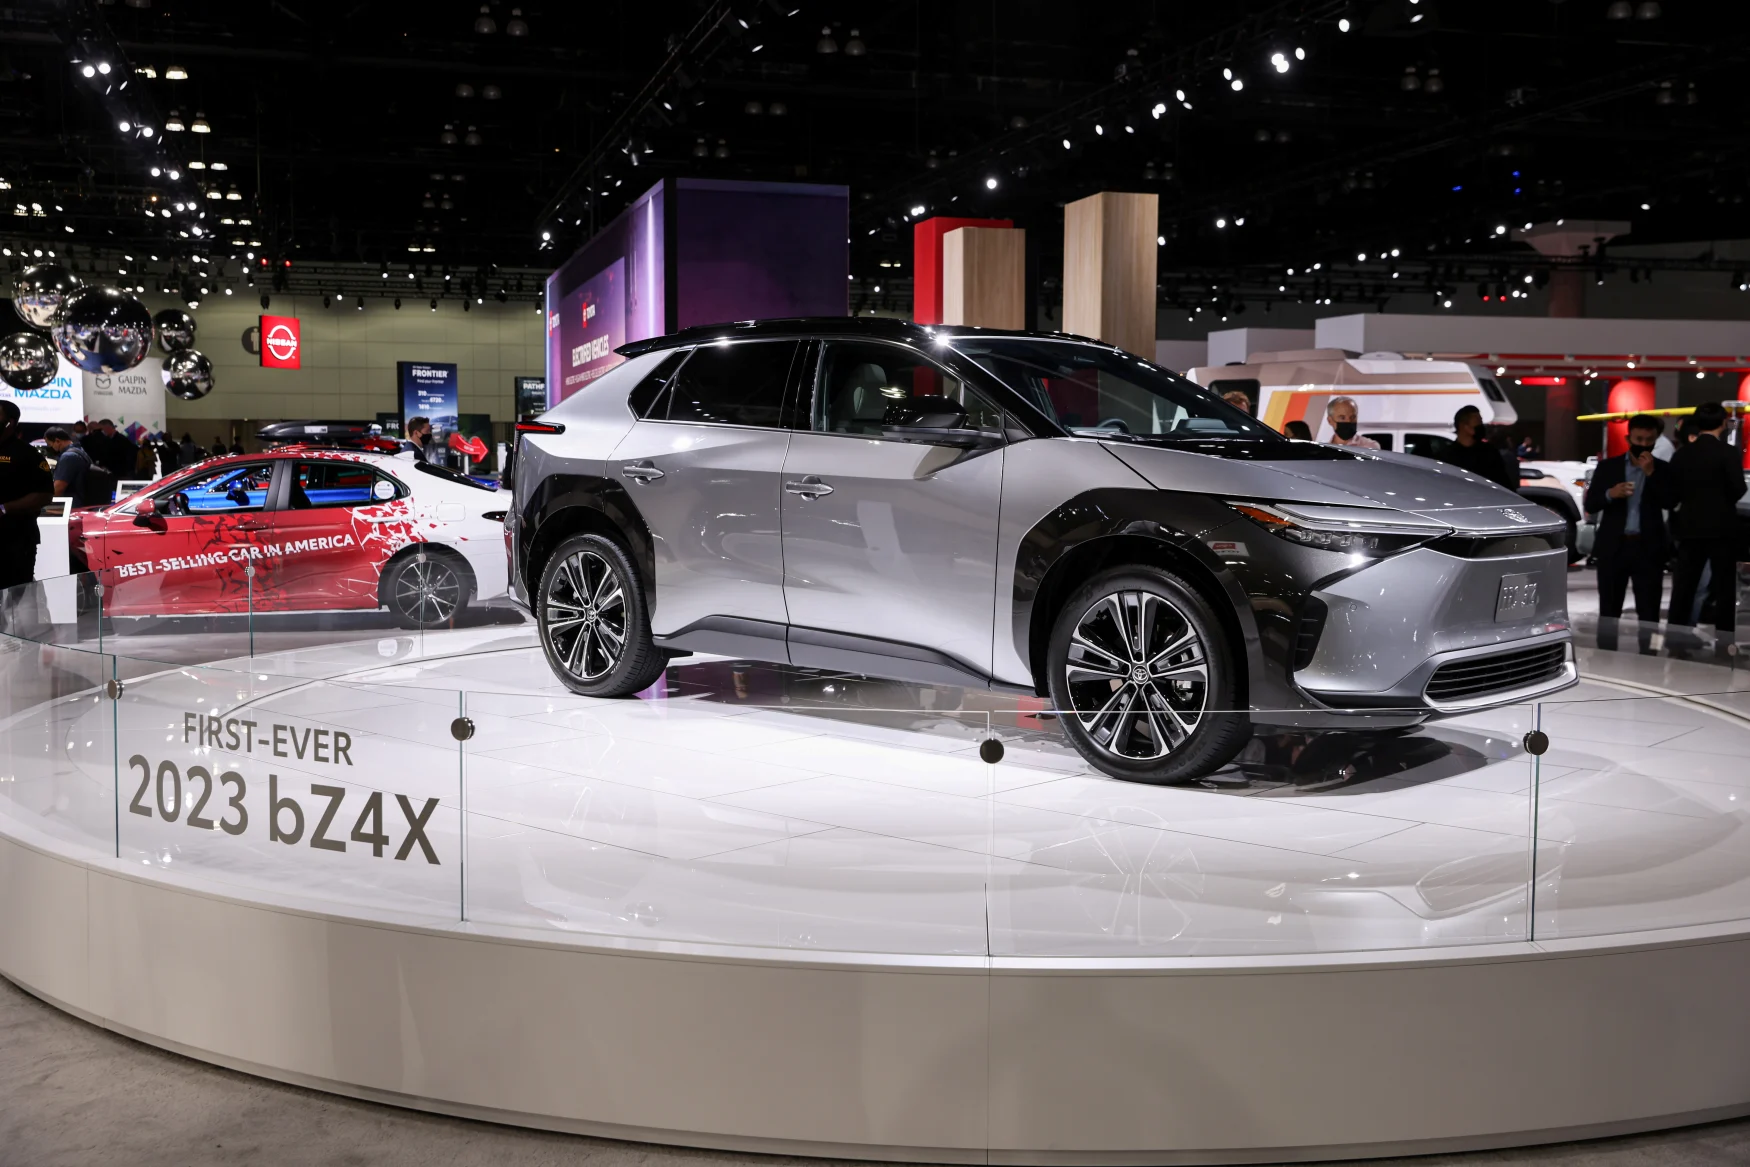 2023 Toyota bZ4X all-electric SUV is displayed during the 2021 LA Auto Show in Los Angeles, California, U.S. November, 17, 2021. REUTERS/Mike Blake